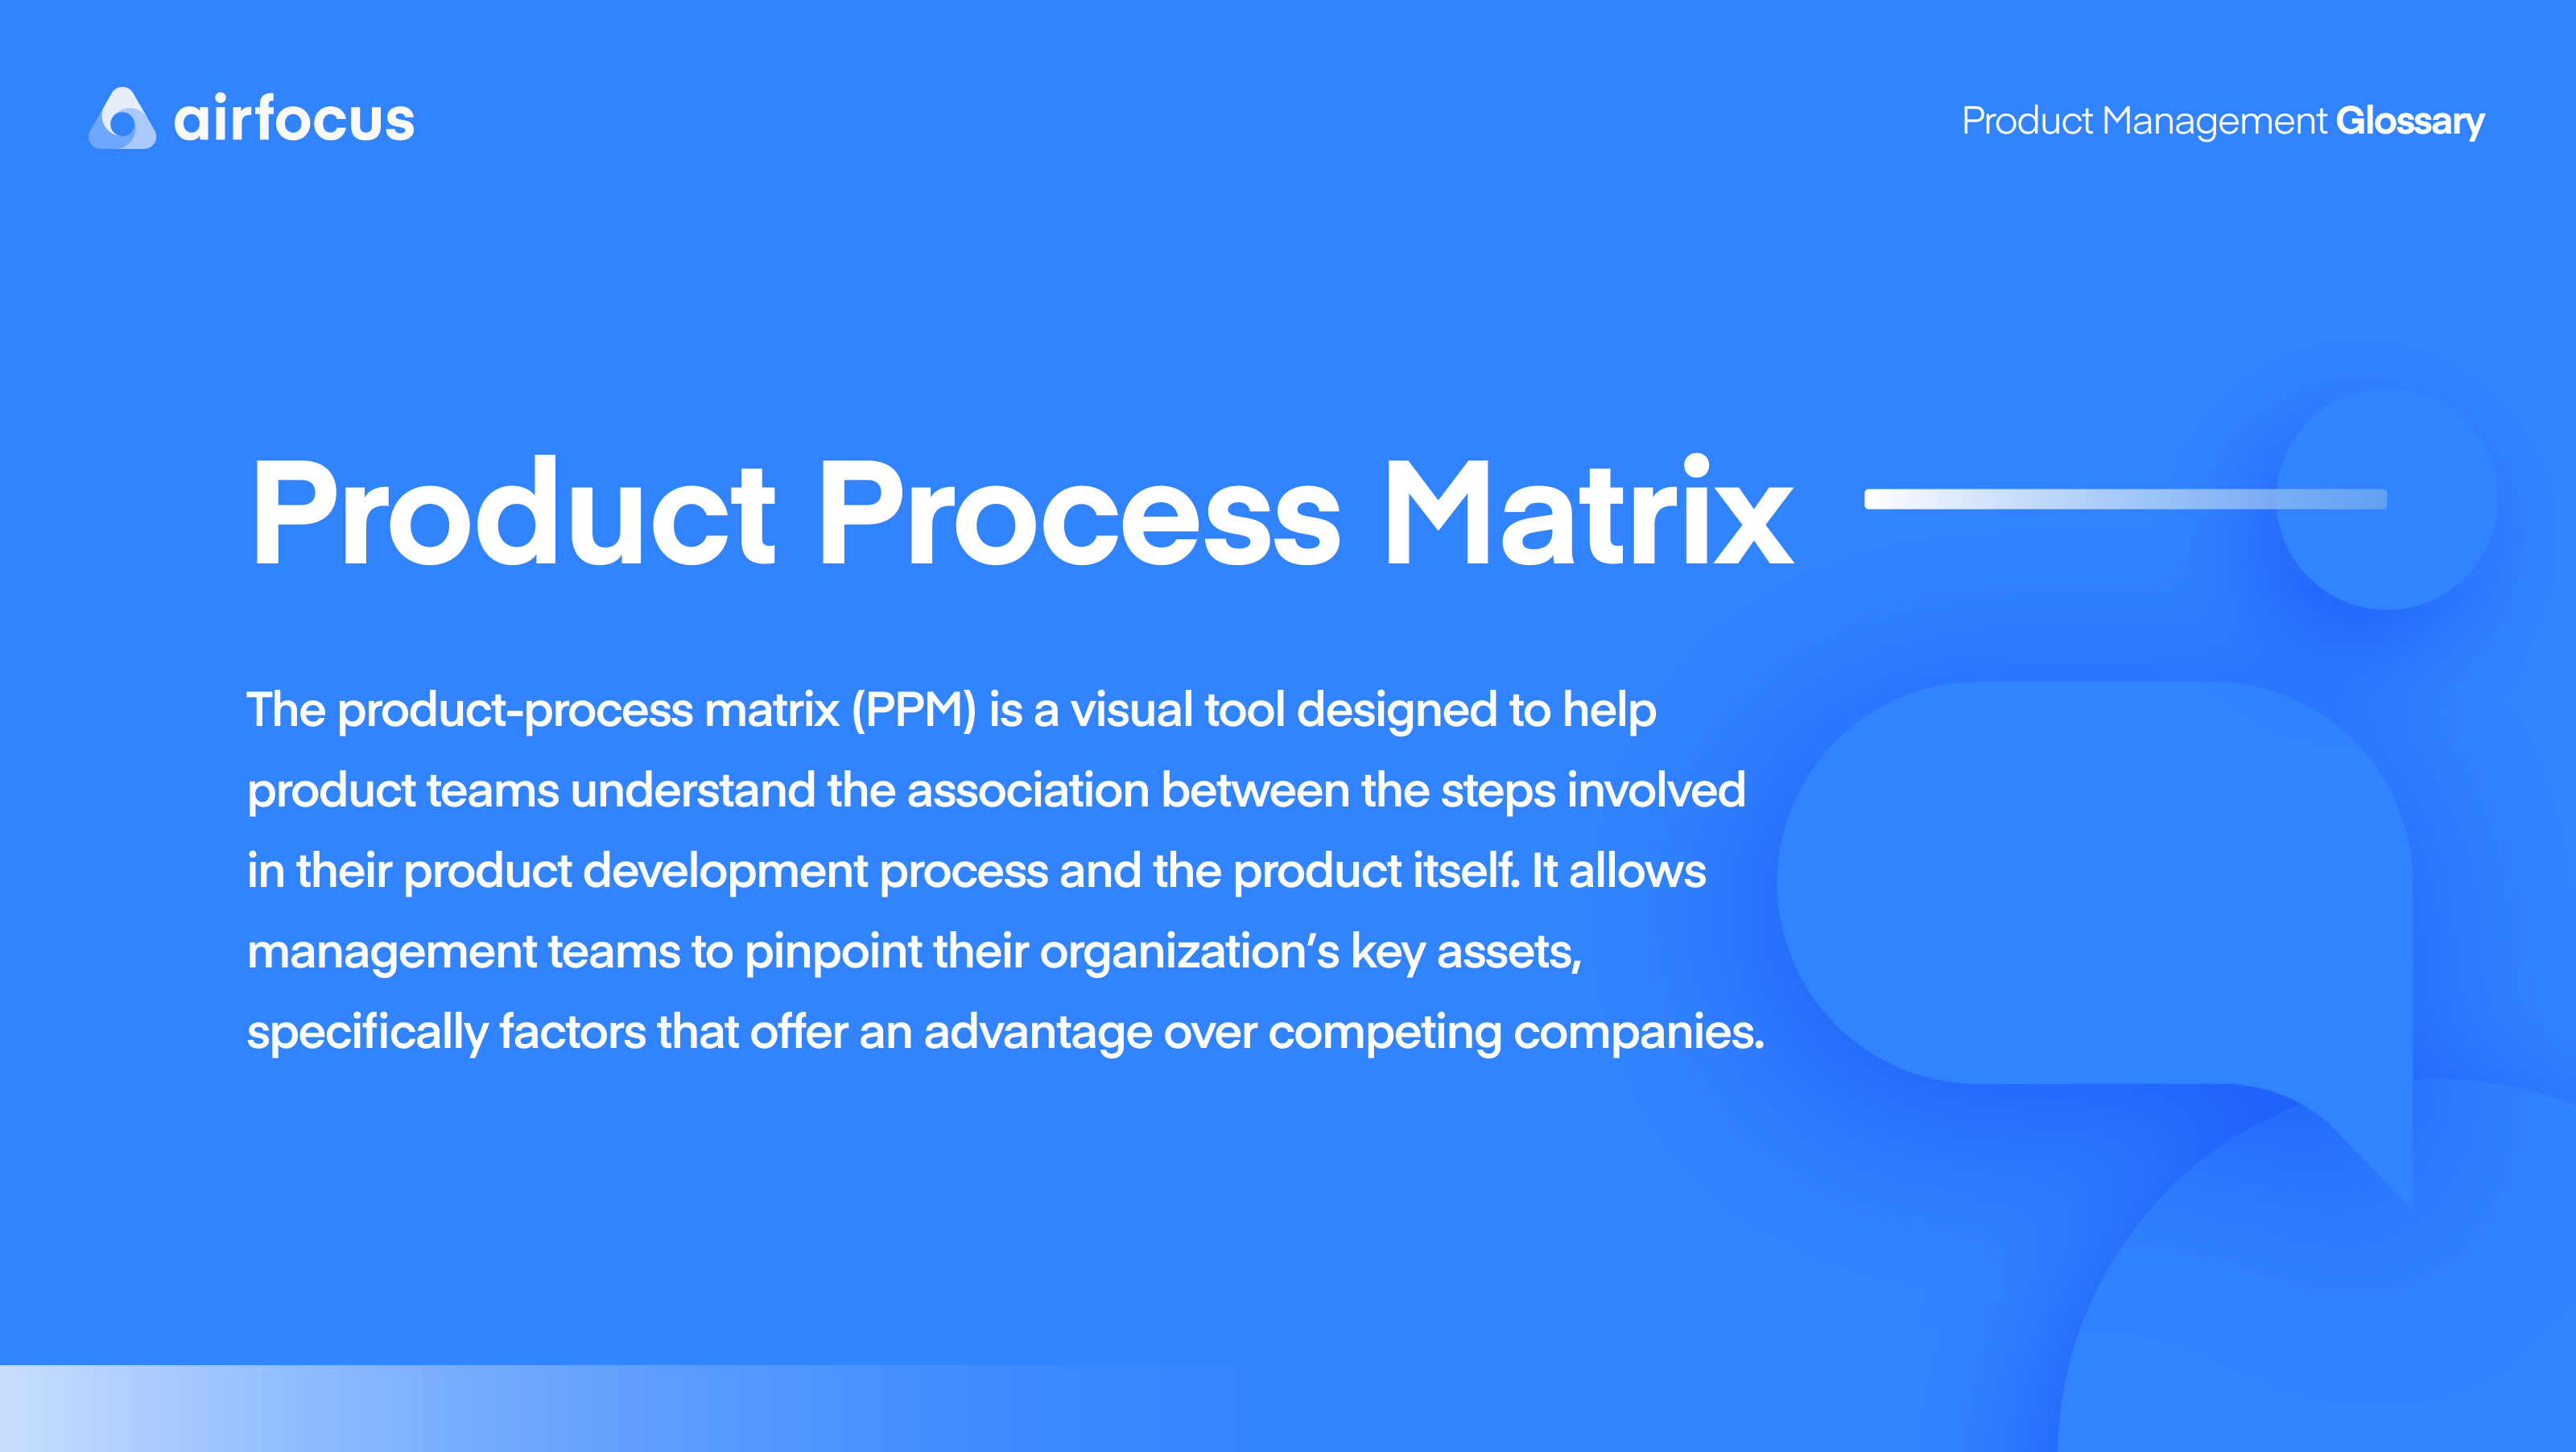 What Is a Product Process Matrix? Definition & FAQ